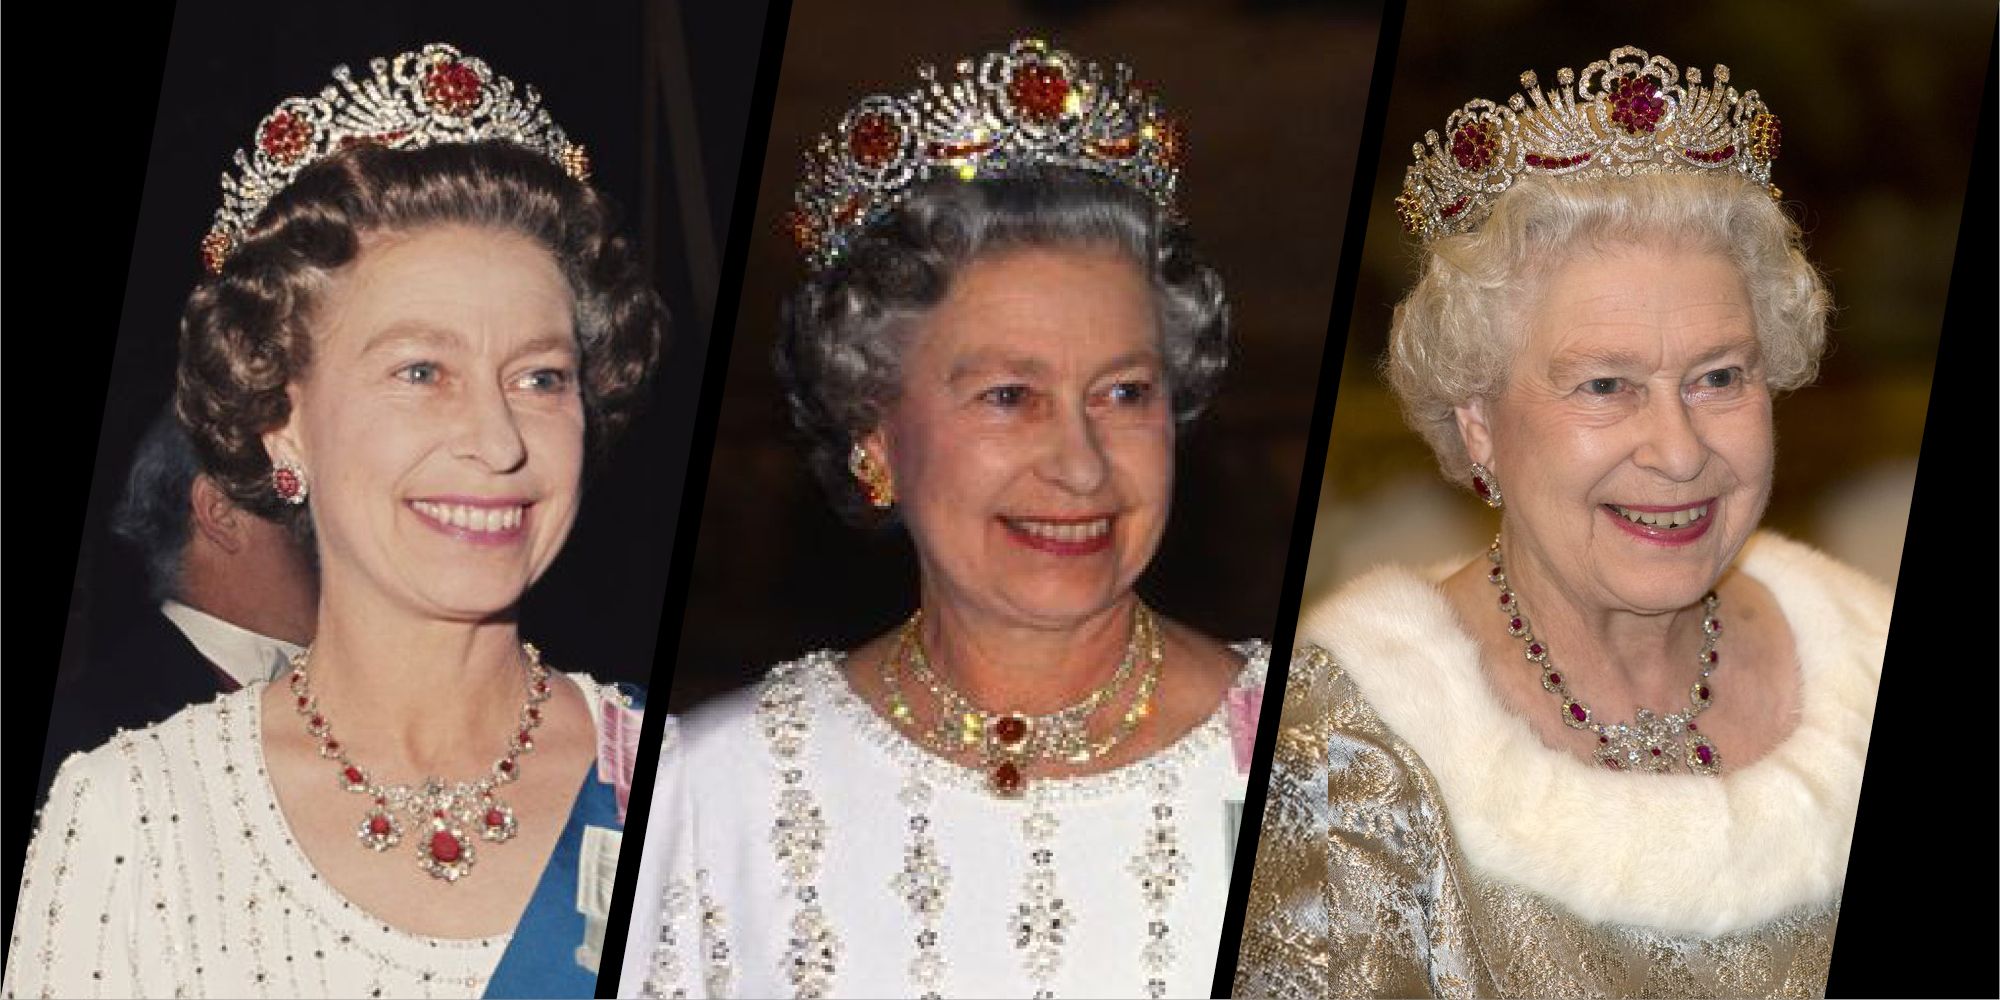 The Queen's trademark hairstyle demonstrated steadfast dedication to a look